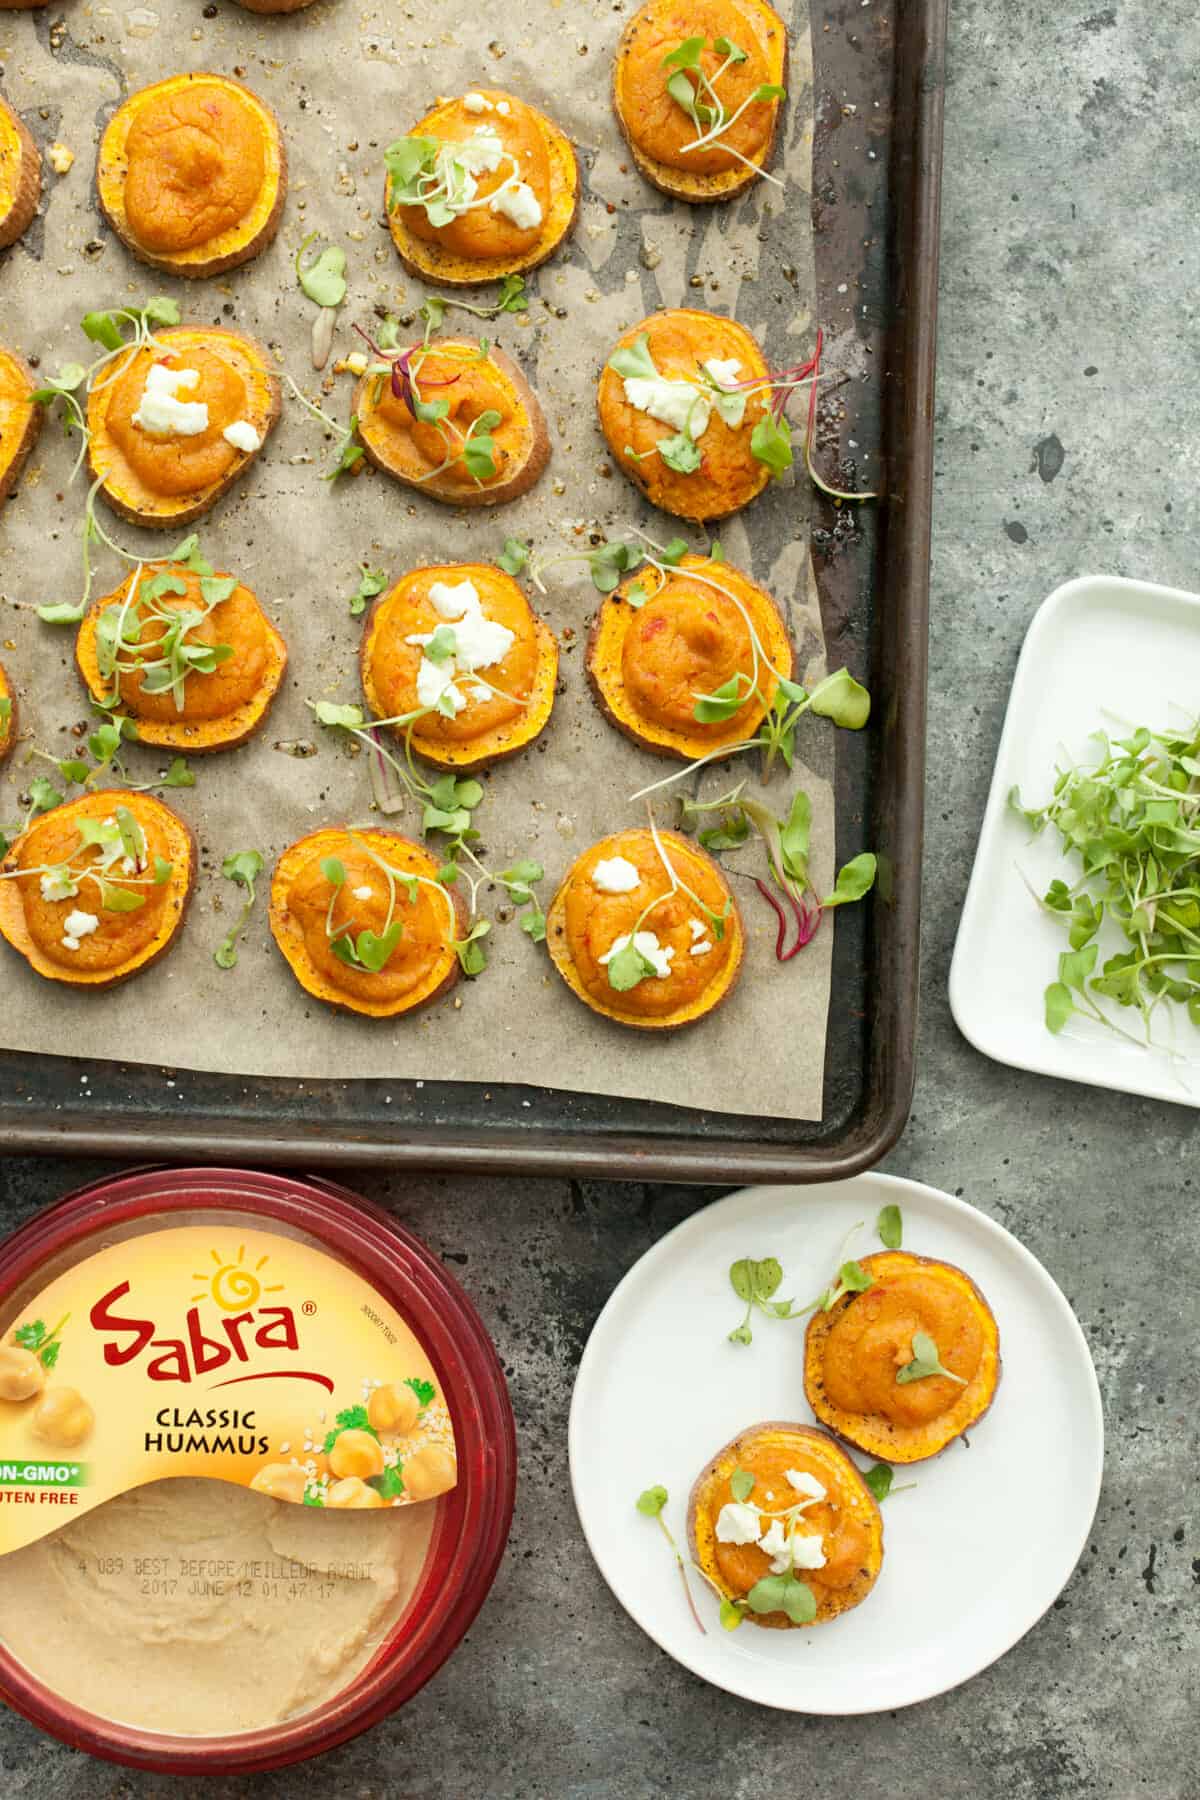 Hummus Sweet Potato Rounds: These beautiful apps are simple to make but have big flavors! Great for a party or pile them up for a quick unofficial meal! | macheesmo.com